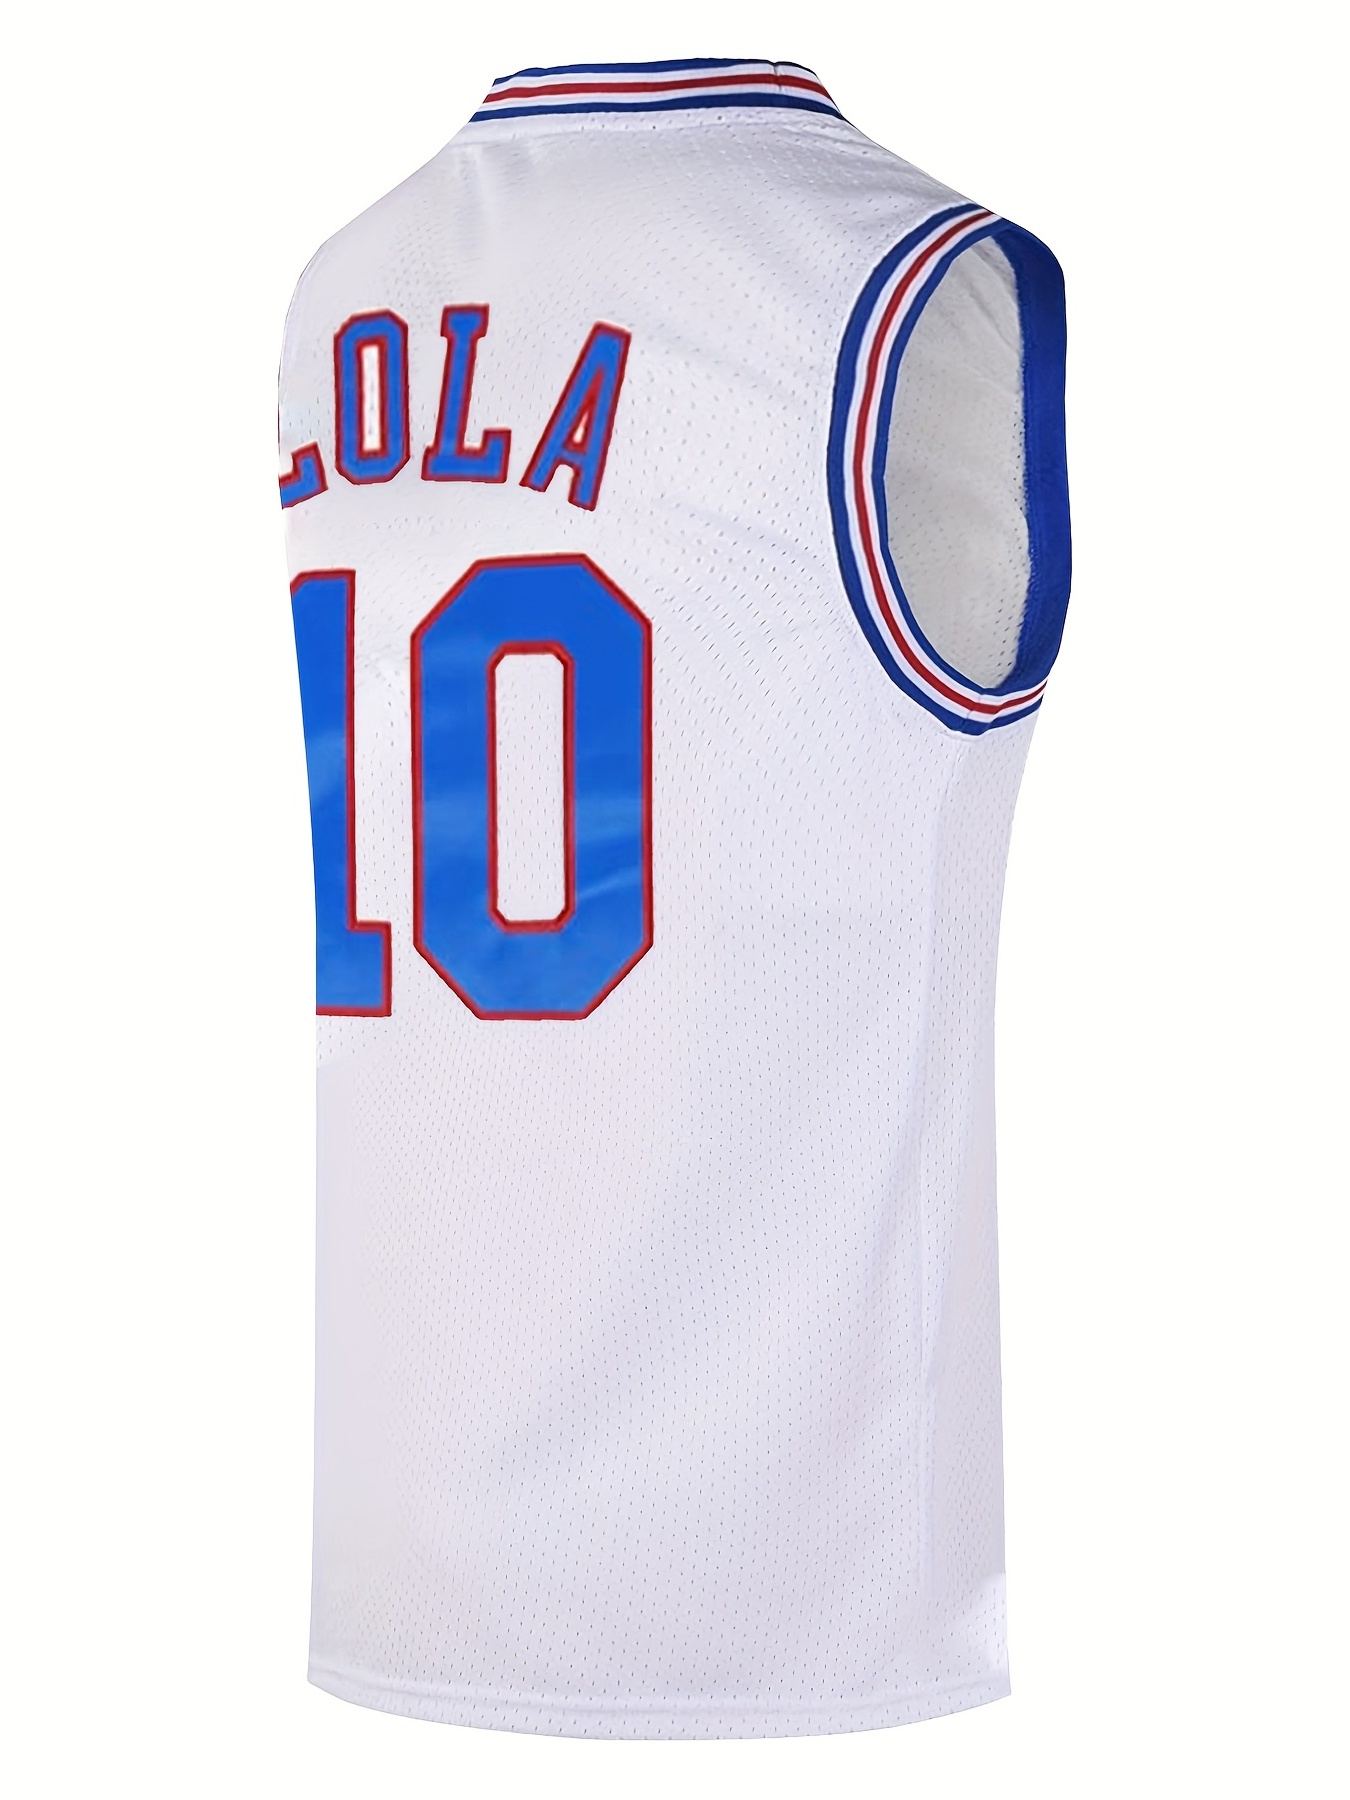 Movie Space Bugs Bunny Lola #10 Basketball Jersey Stitched Party